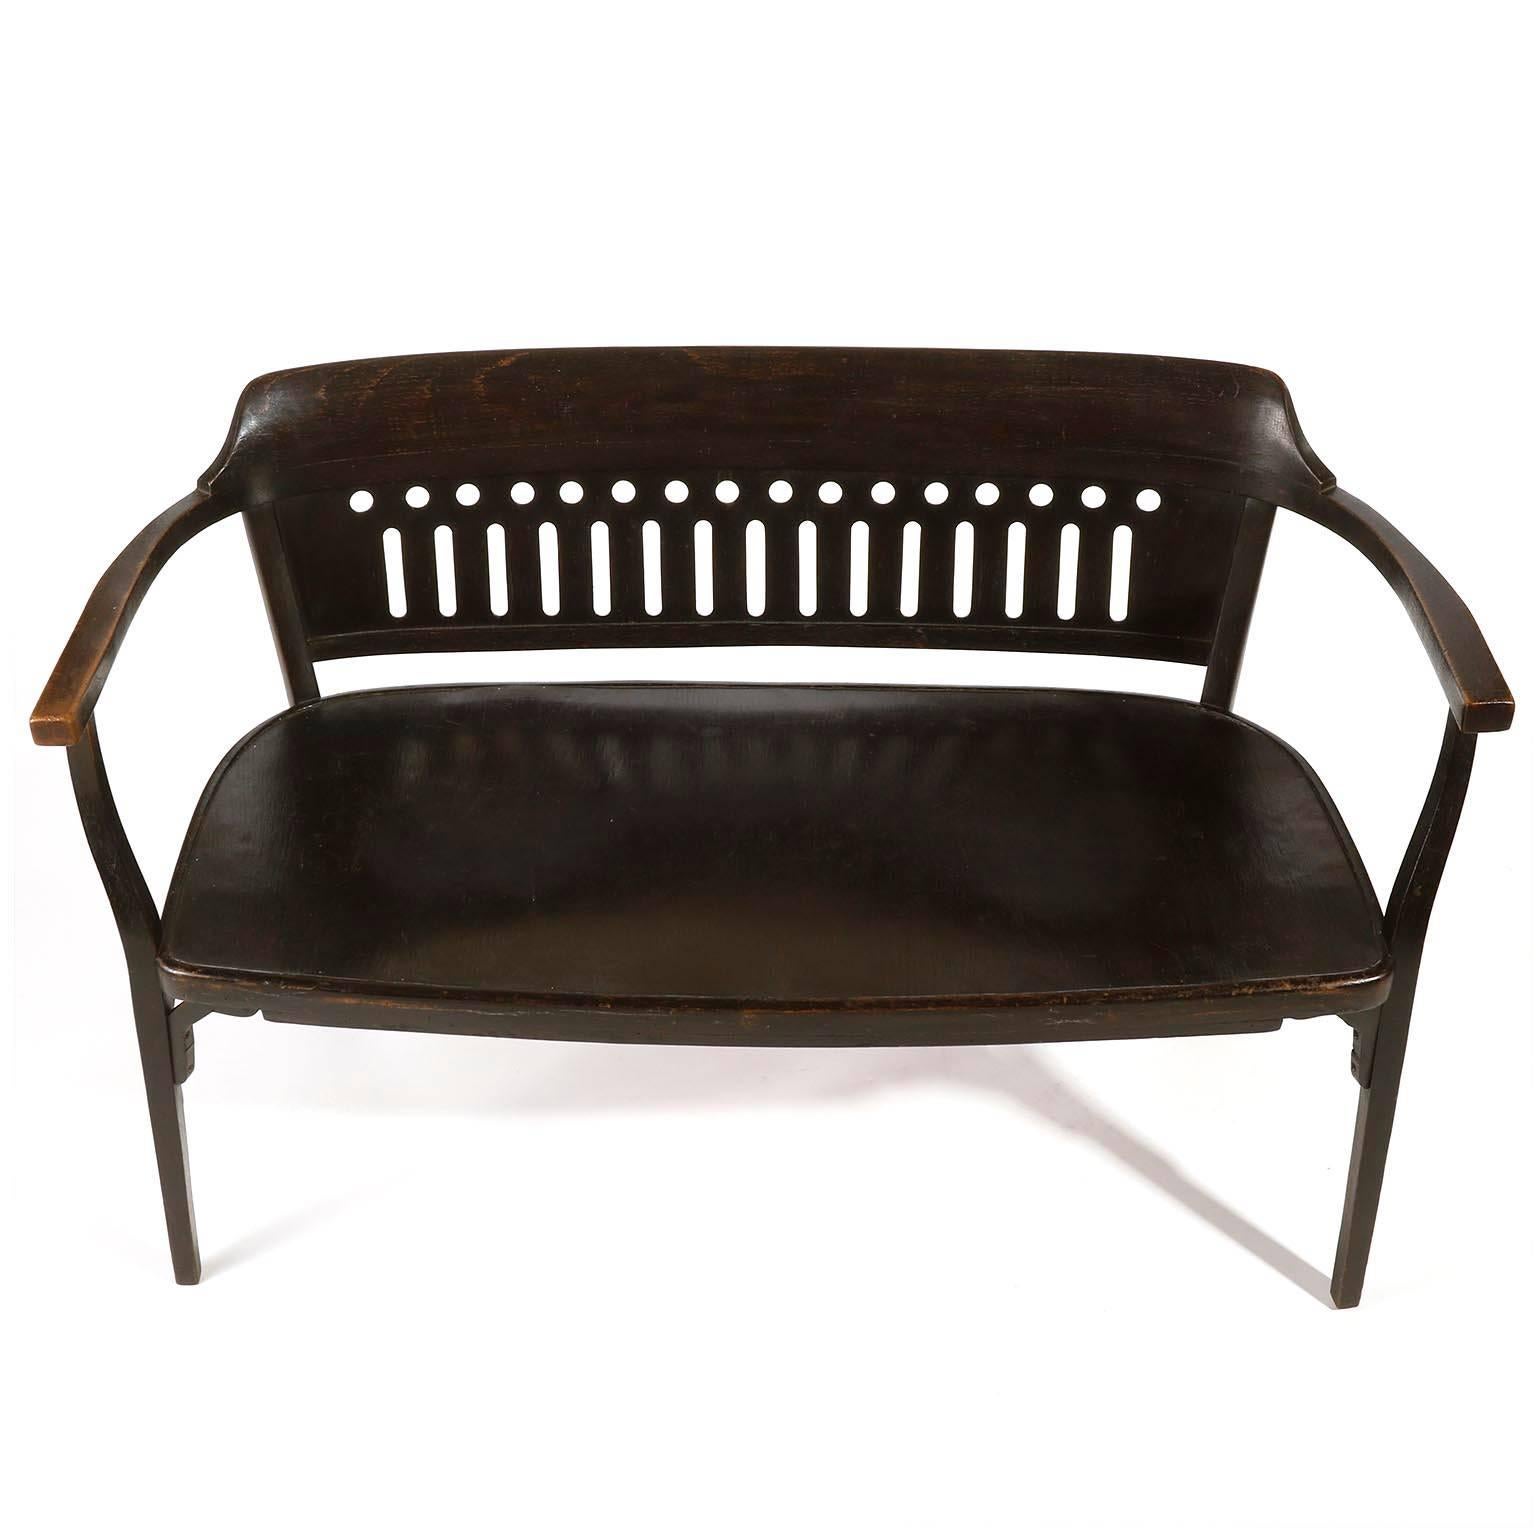 Polished Otto Wagner Settee Bench Bentwood, Thonet, Austria, Vienna Secession, circa 1905 For Sale